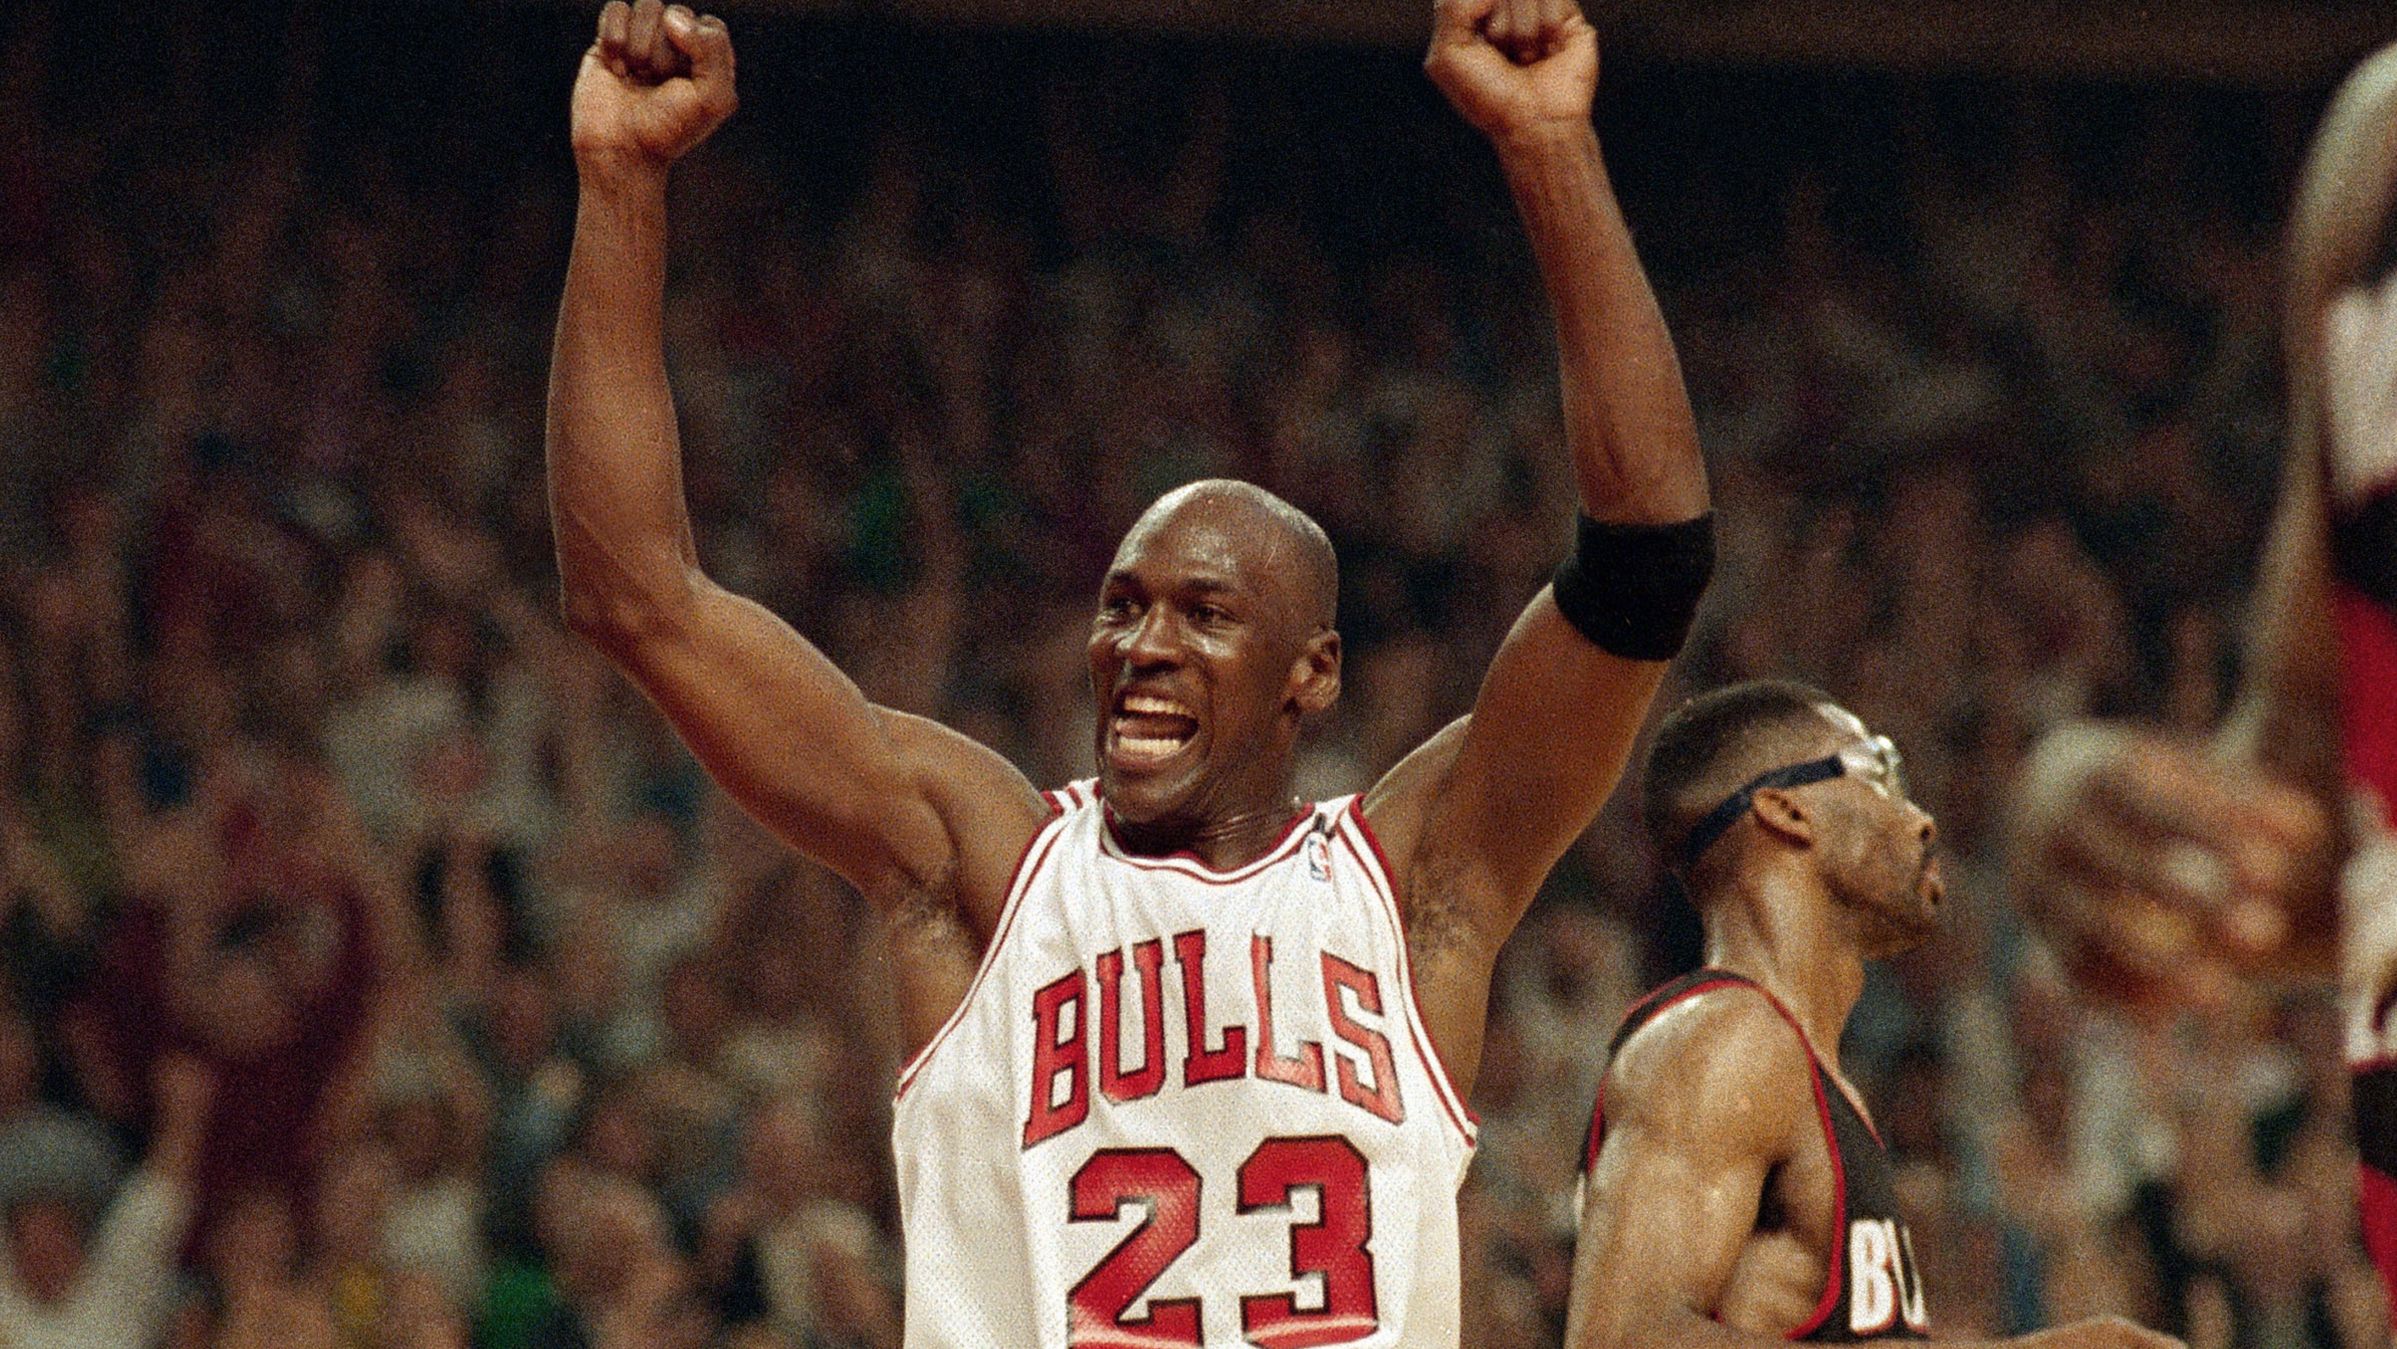 On June 19, 1984 Michael Jordan was signed to the Chicago Bulls basketball team. He would go on to be considered the greatest basketball player of all time after winning six championships with the Bulls.